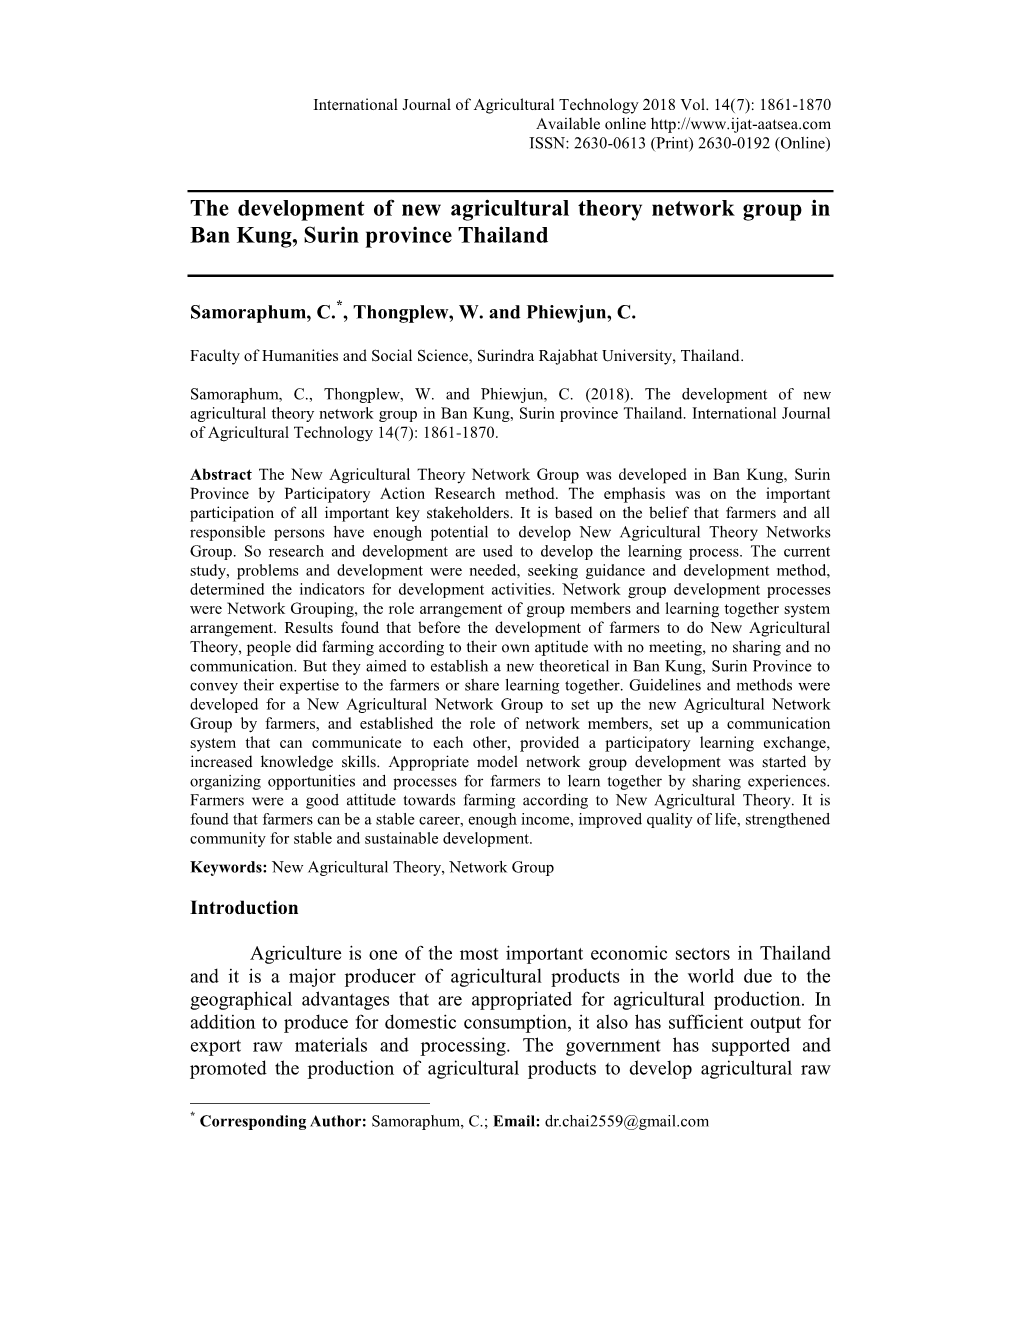 The Development of New Agricultural Theory Network Group in Ban Kung, Surin Province Thailand